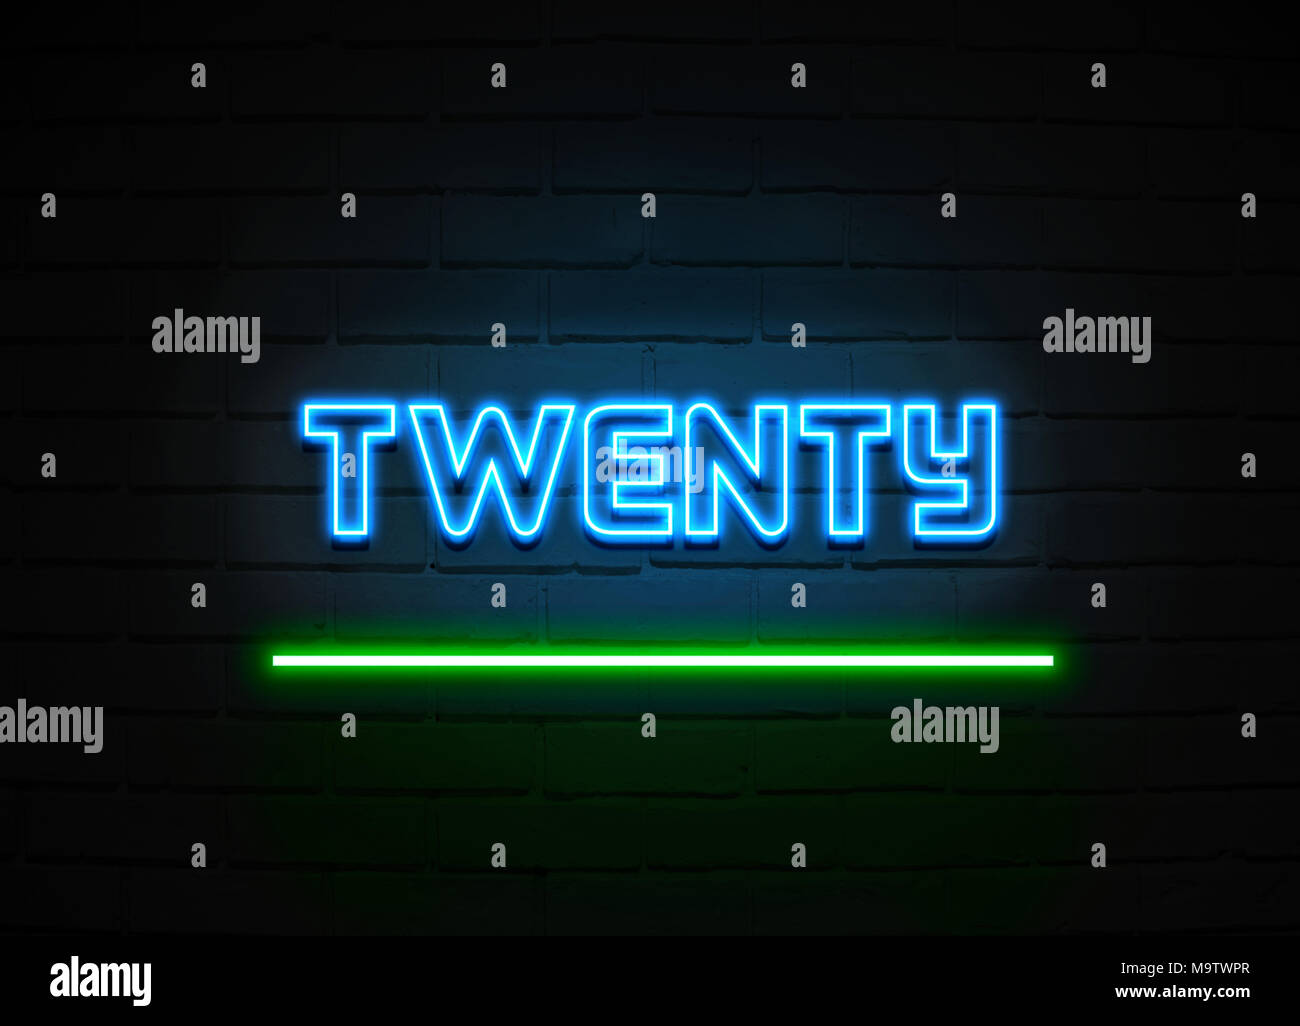 Twenty neon sign - Glowing Neon Sign on brickwall wall - 3D rendered royalty free stock illustration. Stock Photo